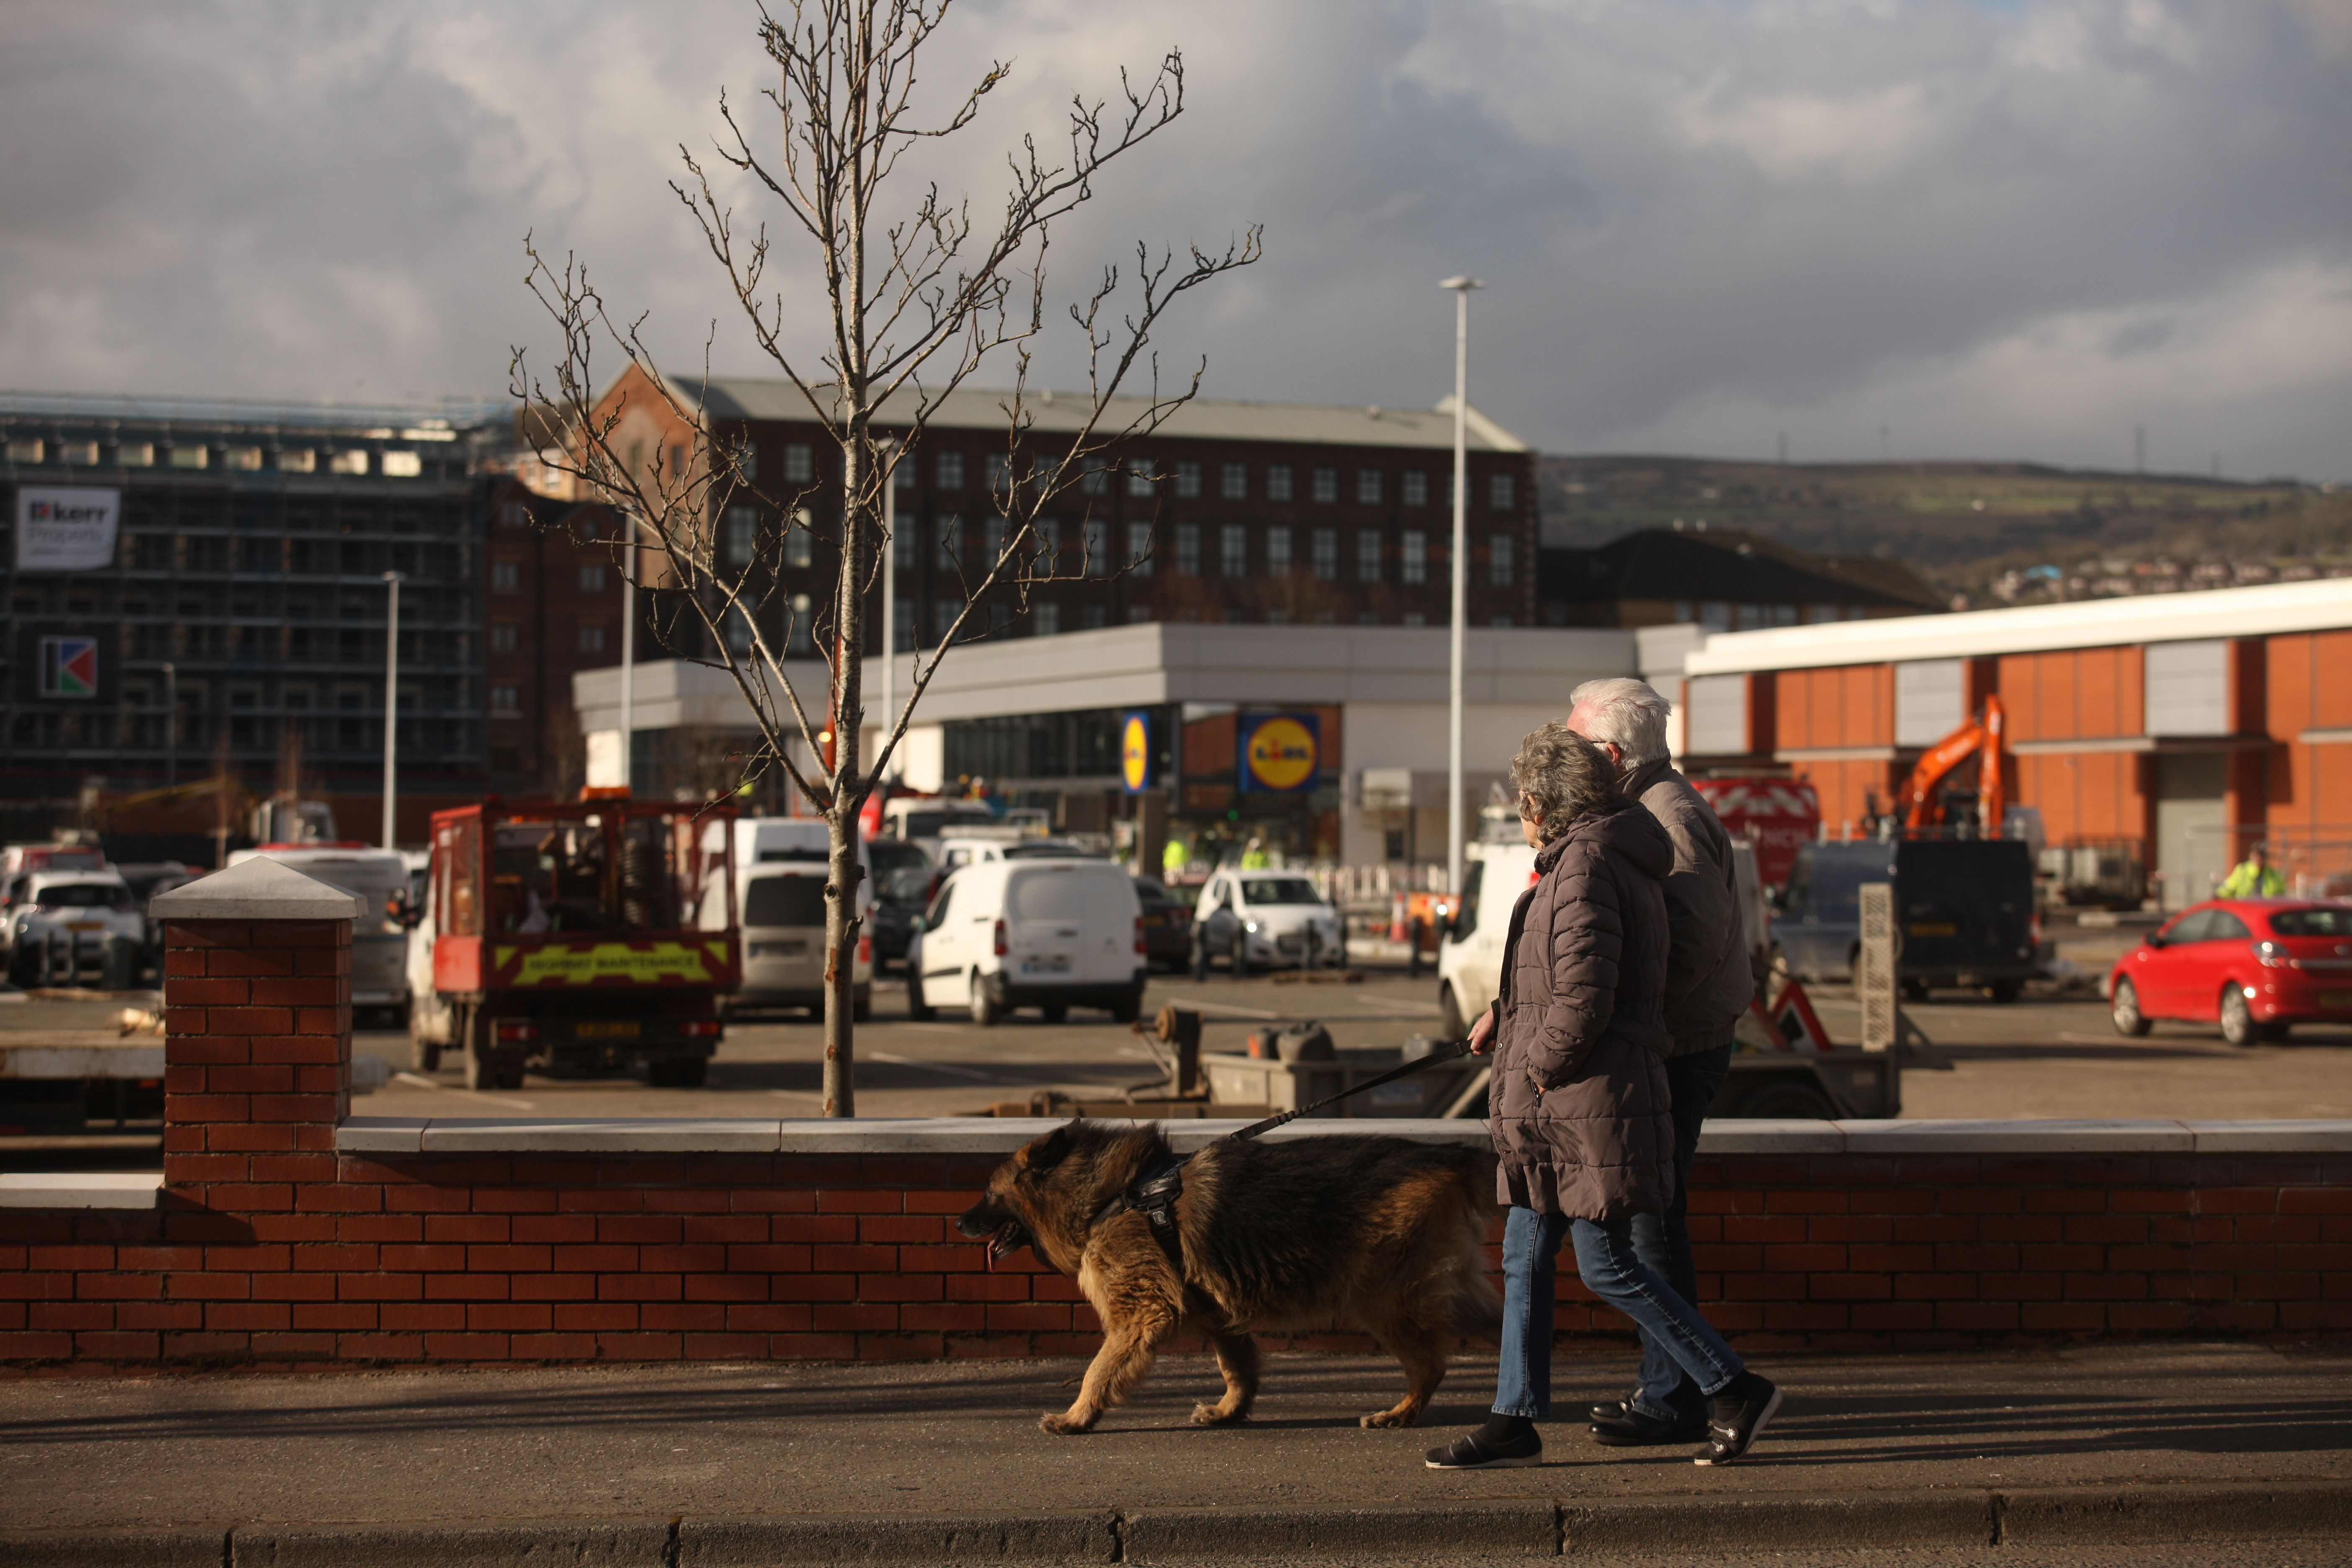 SOCIAL HOUSING: Hillview Retail Park on the Crumlin Road